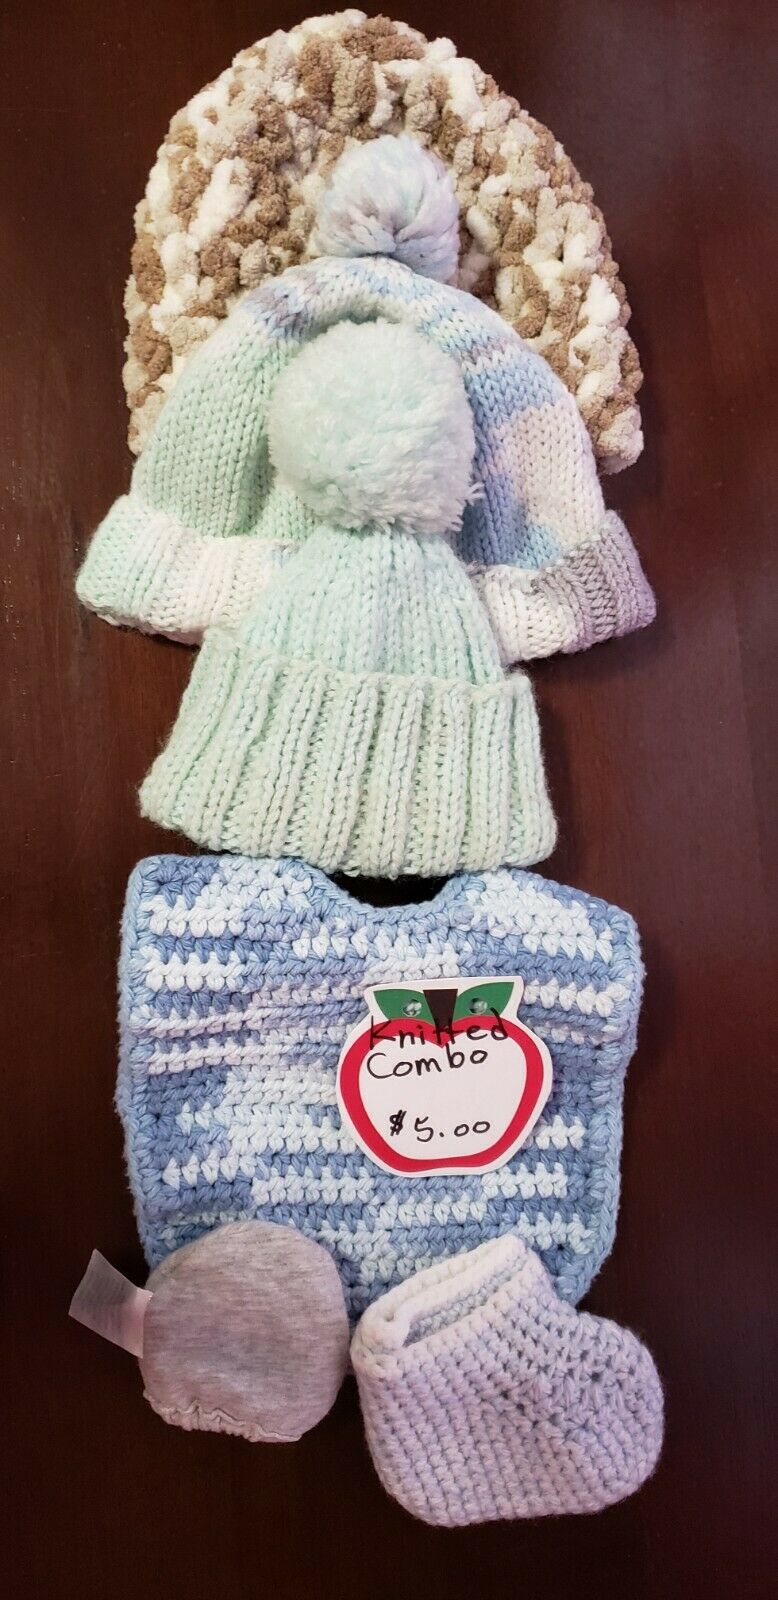 Vintage Knitted Baby Bib, Beanie, Booties, And Mittens